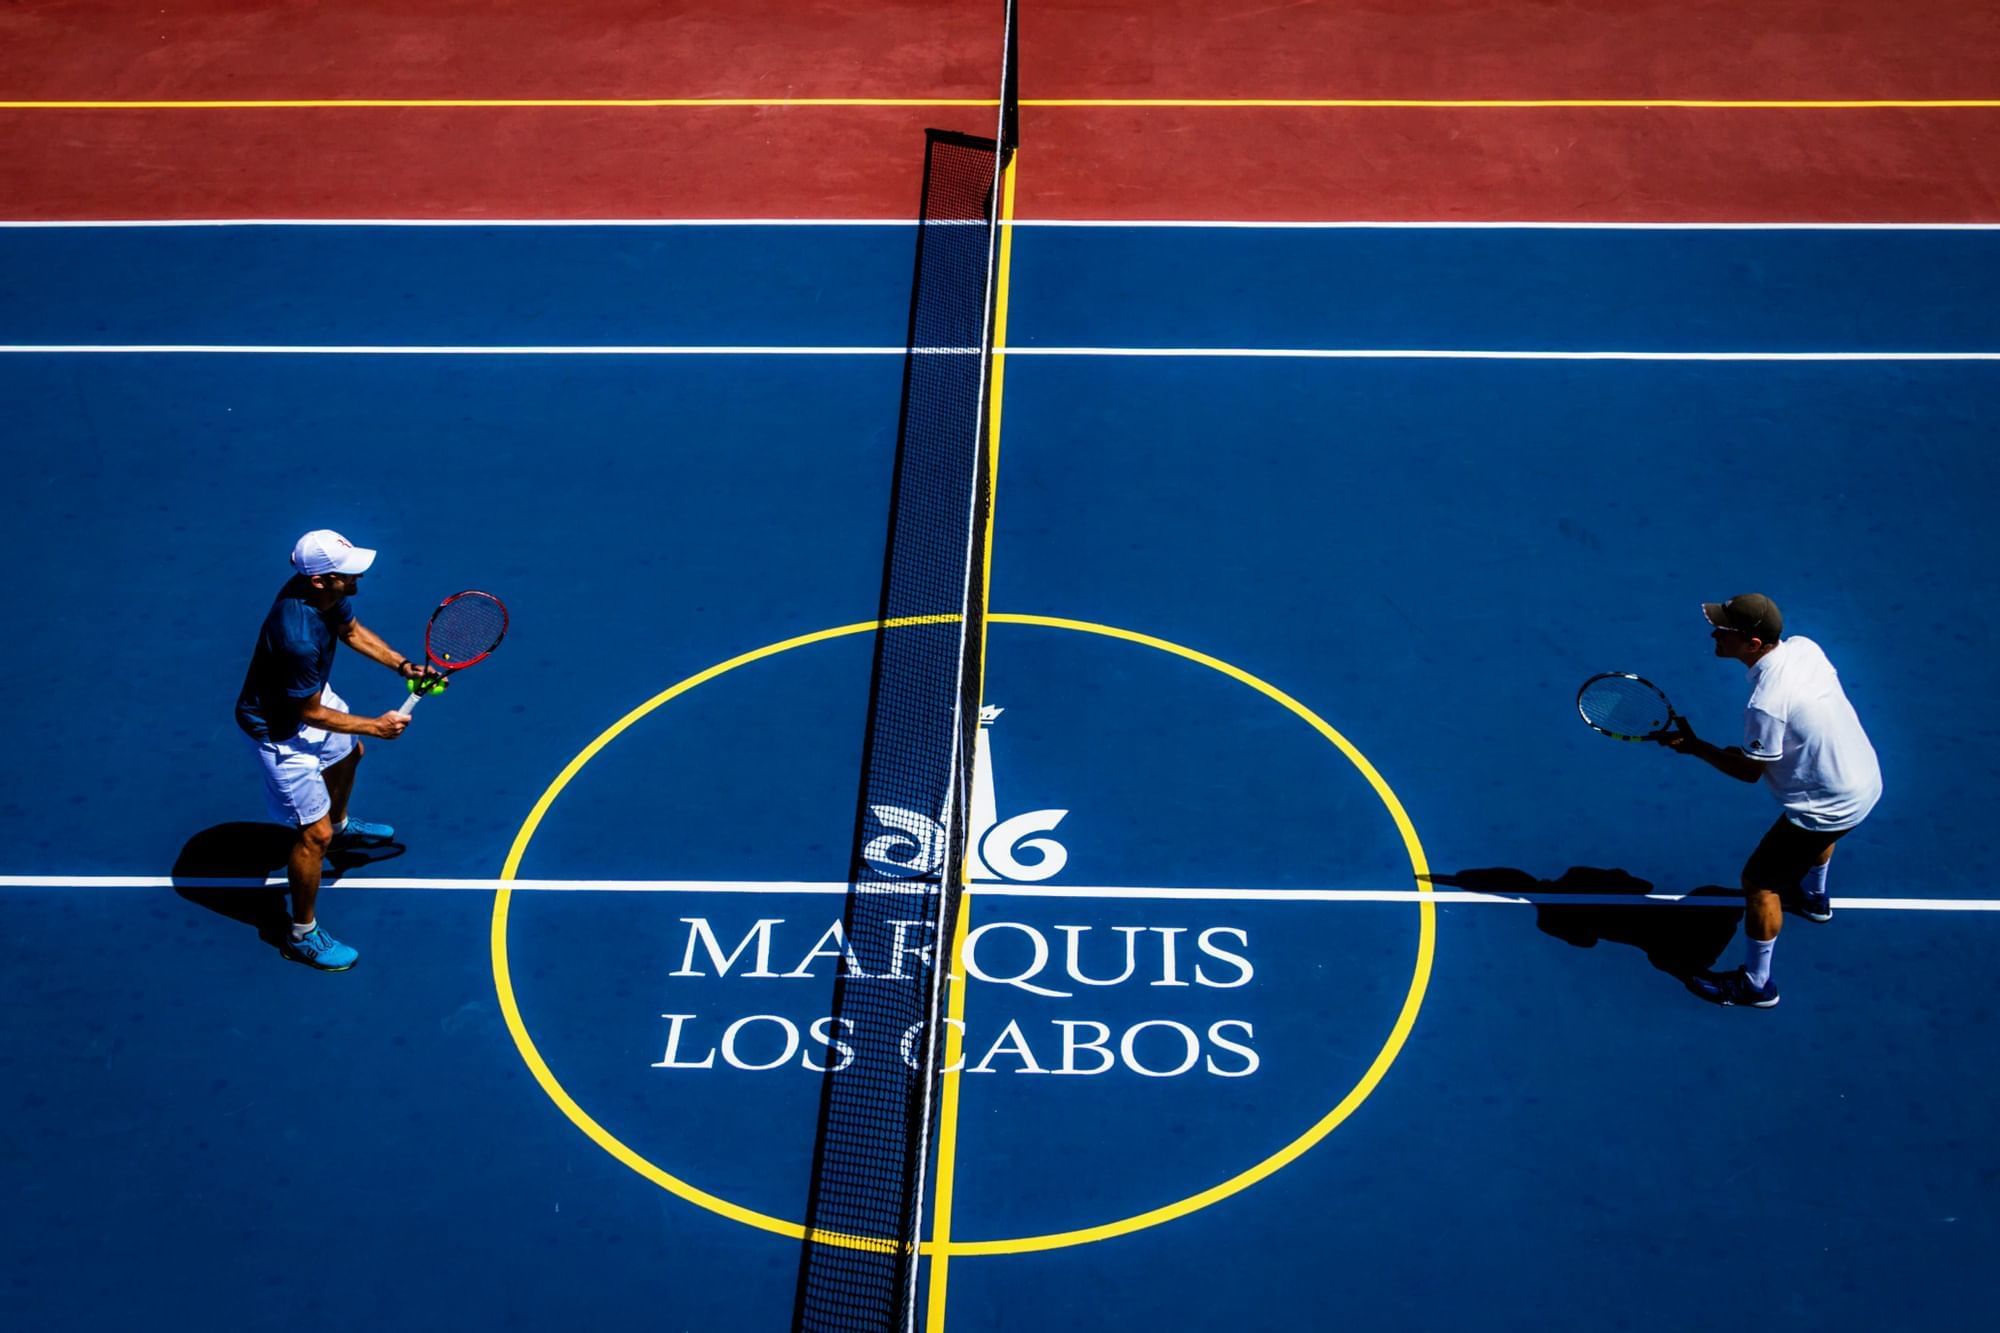 Top view of 2 people playing tennis at Marquis Los Cabos